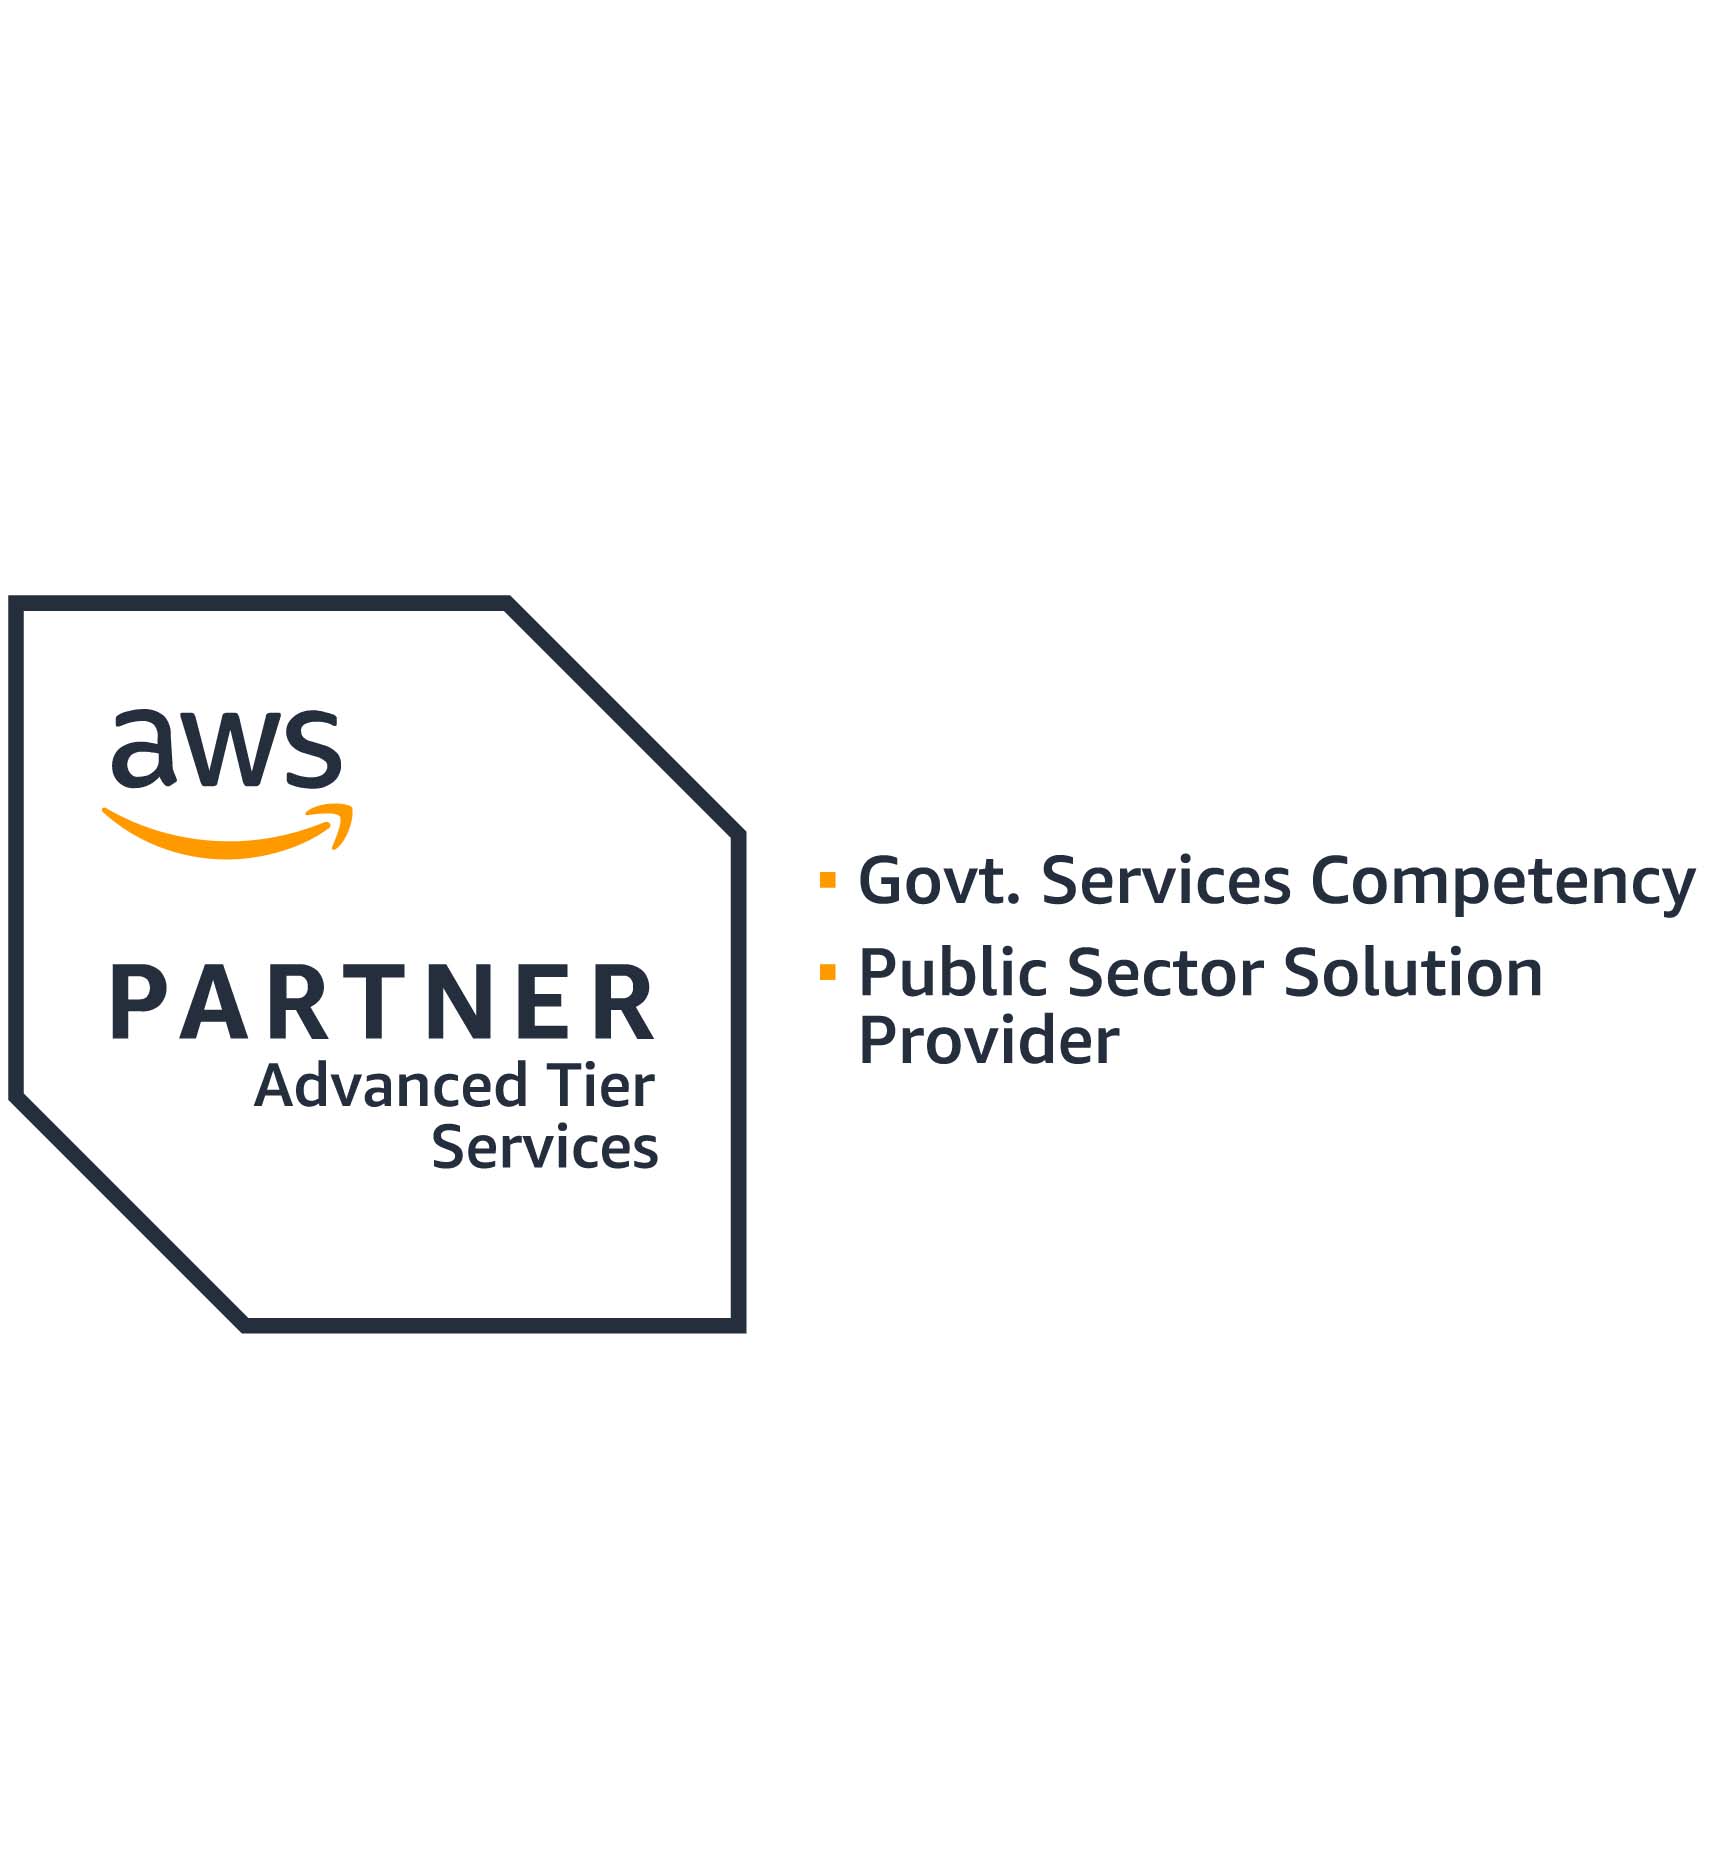 AWS tier and competency 2